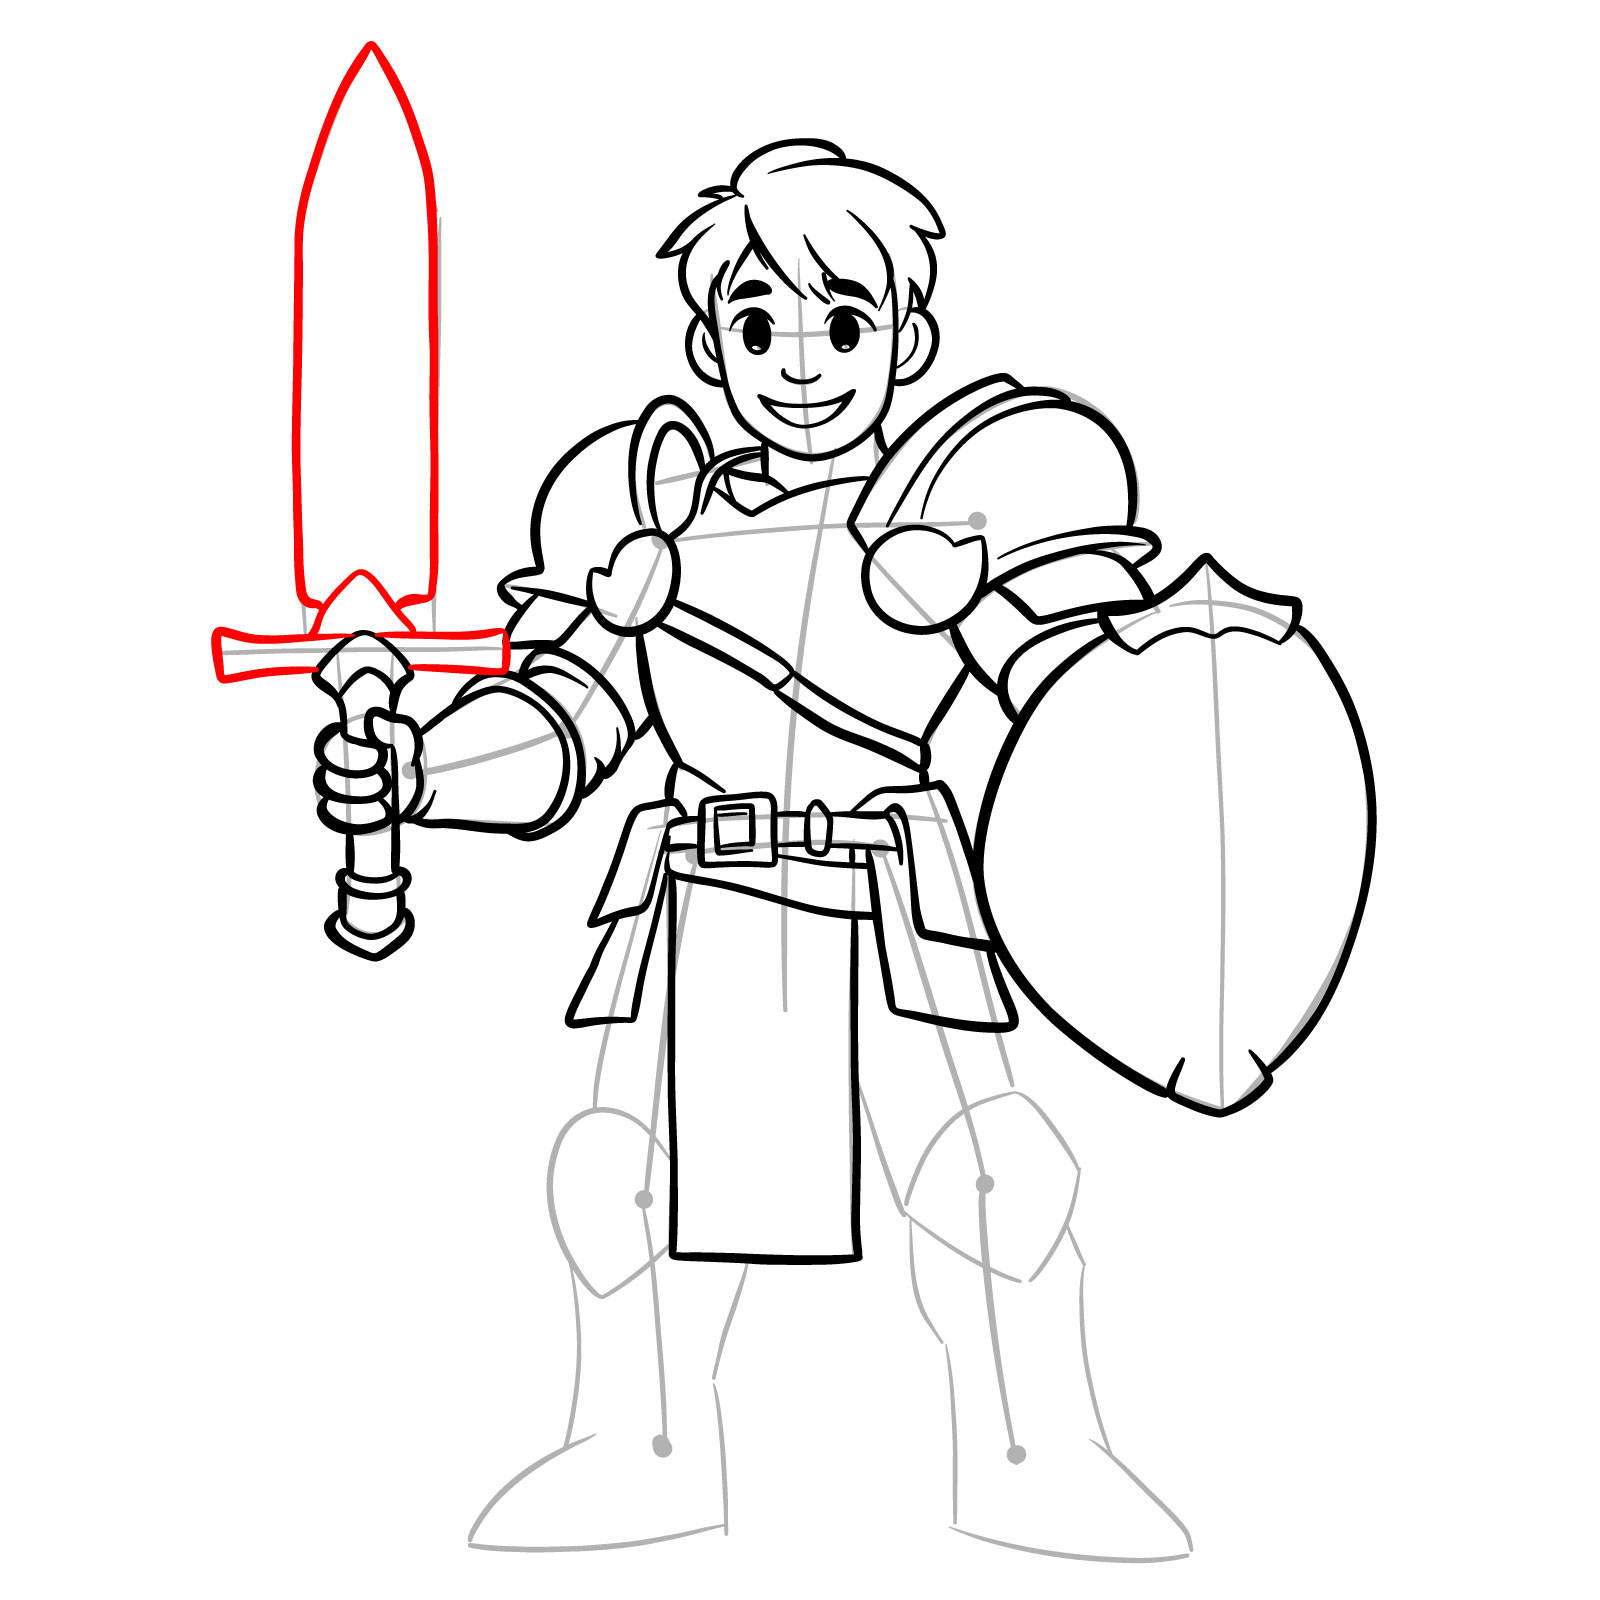 Easy paladin drawing step 17: sword blade outline